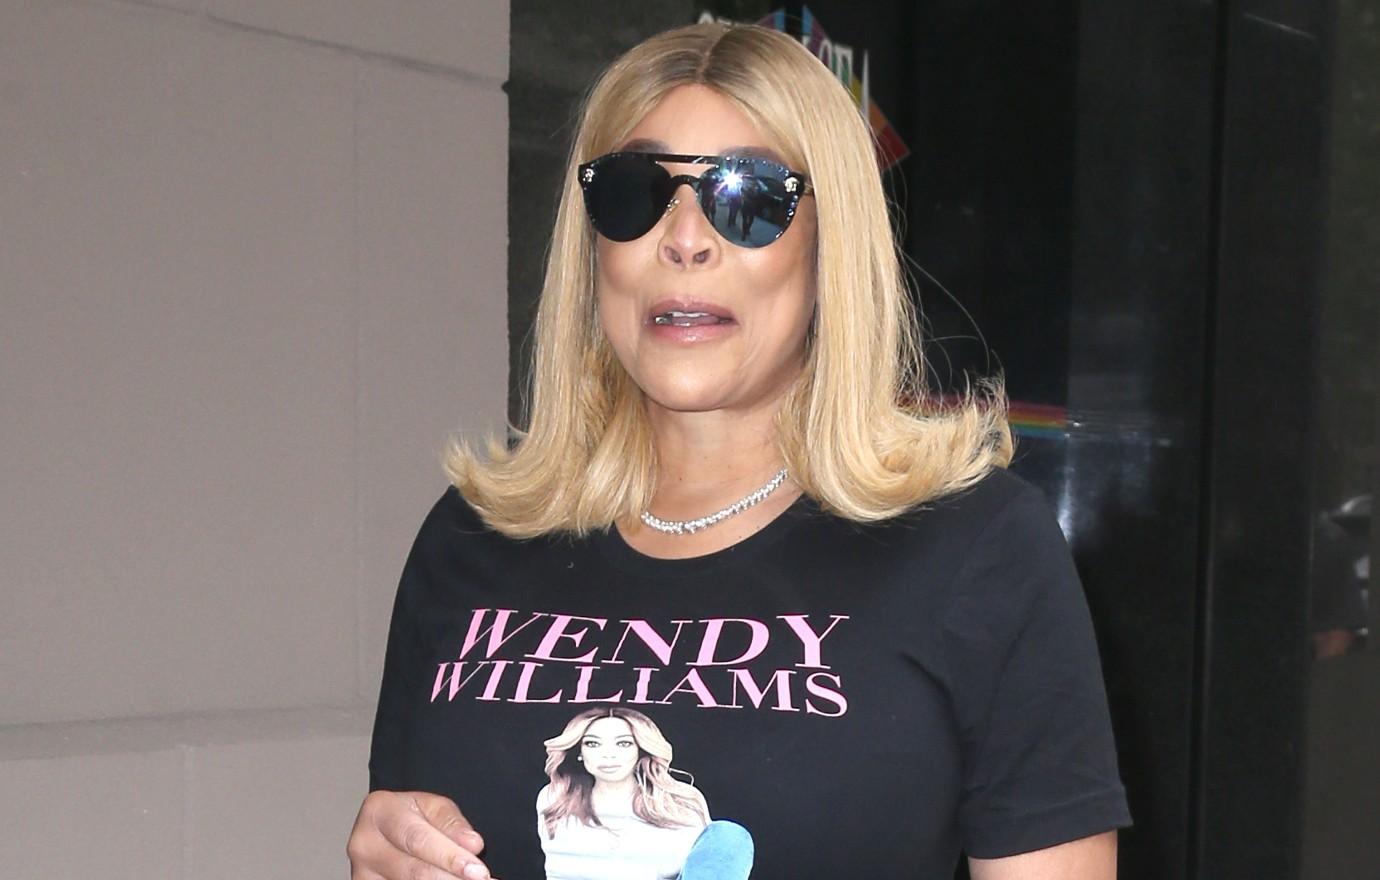 Wendy Williams looks exhausted as she steps out in a sweater covered with stuffed  animals in wild new look